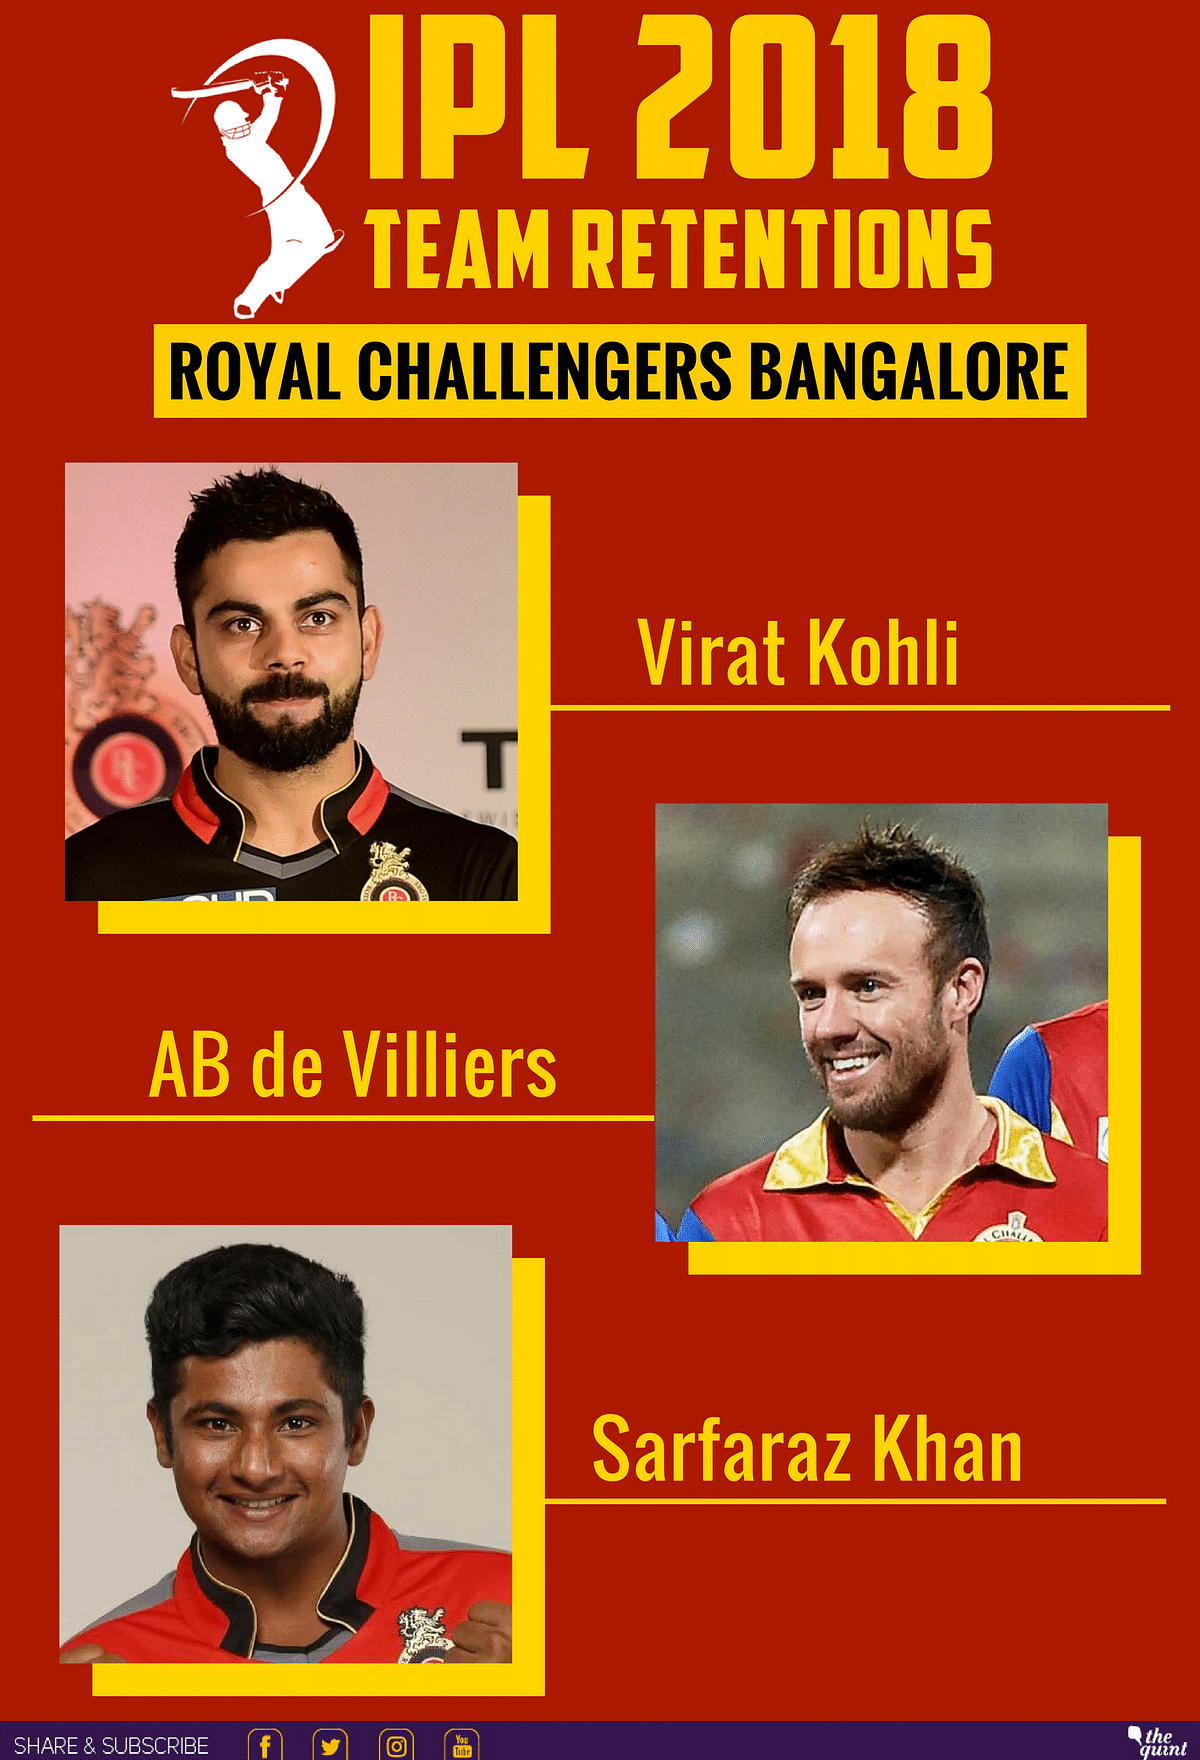 Take a look at the players retained by Chennai Super Kings and Rajasthan Royals.